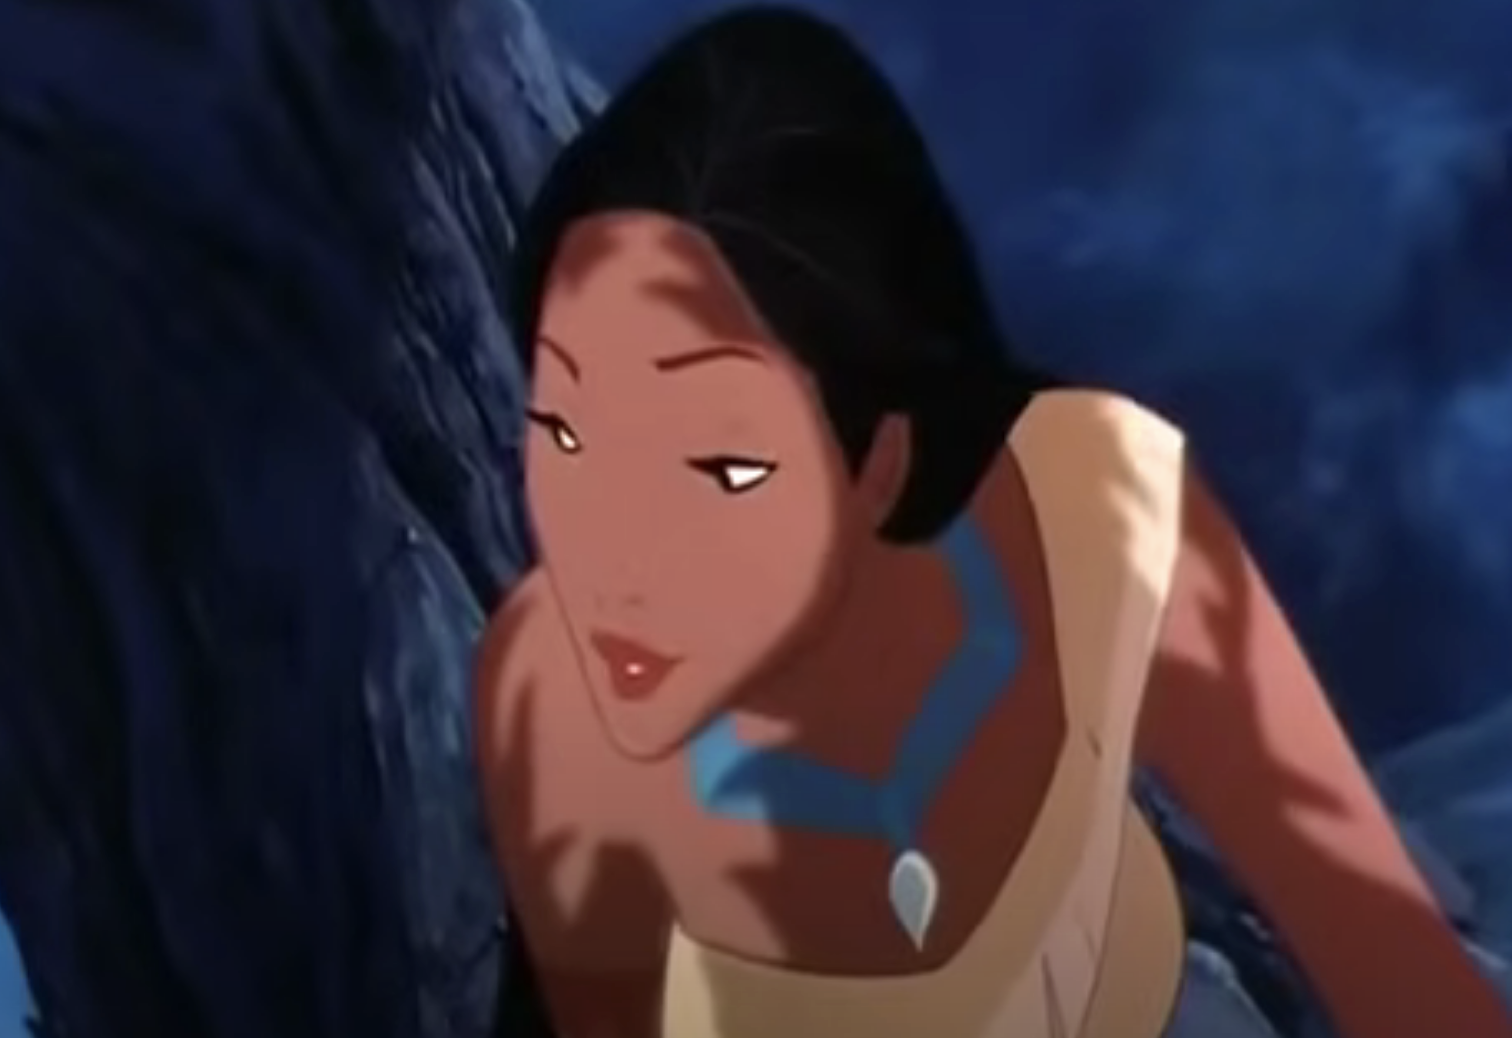 Mulan in animated film, looking thoughtful with concerned expression